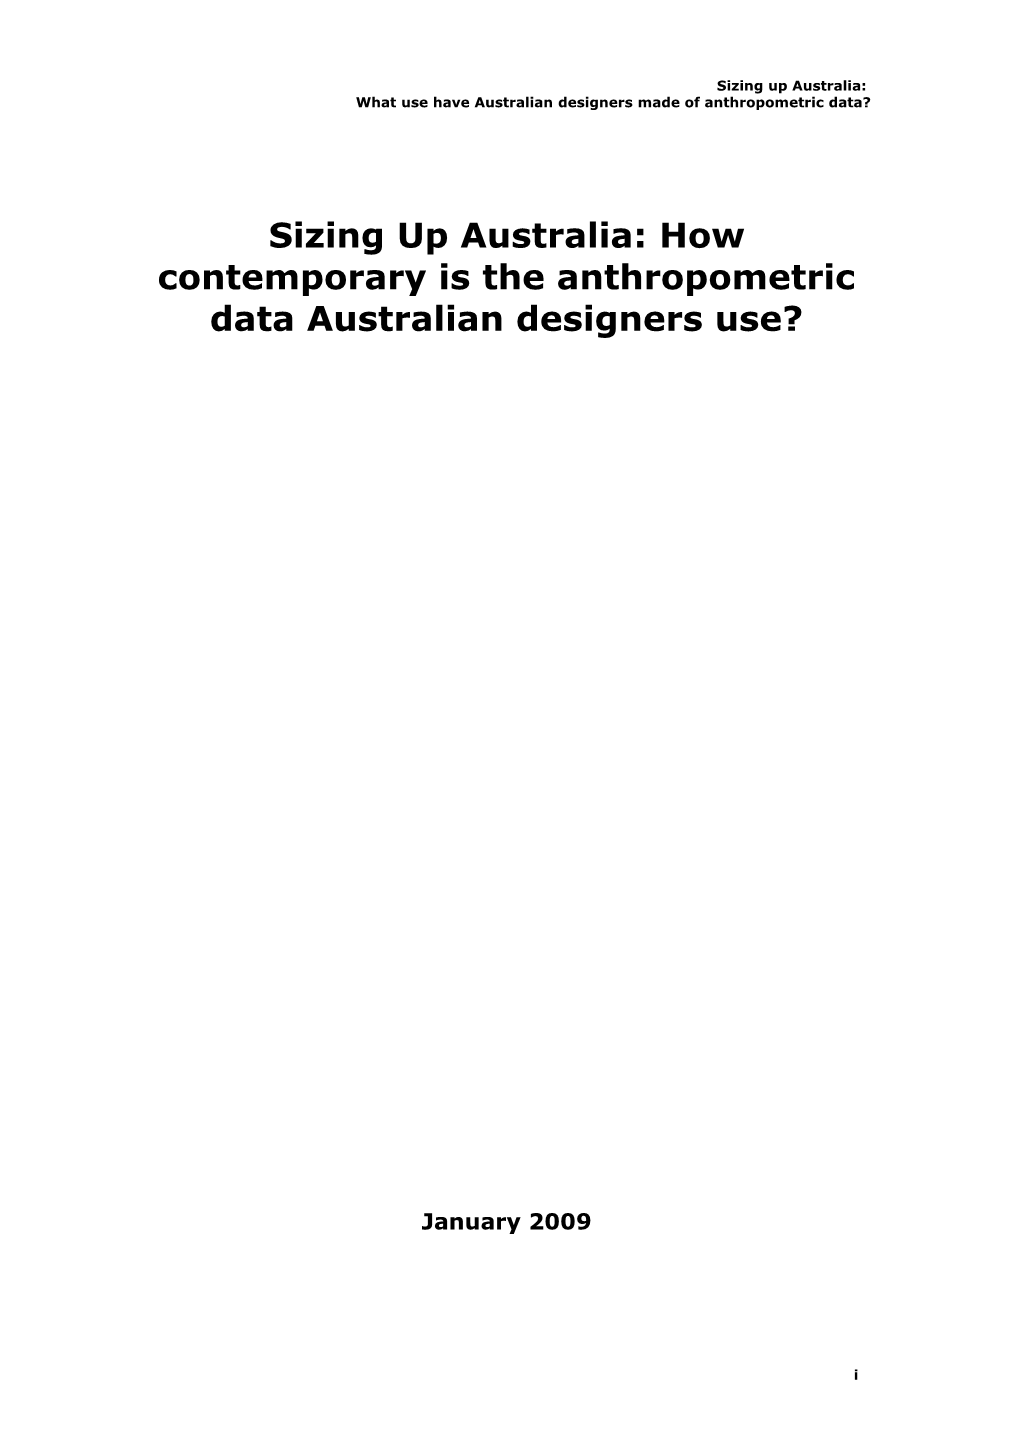 Sizing up Australia: How Contemporary Is the Anthropometric Data Australian Designers Use?